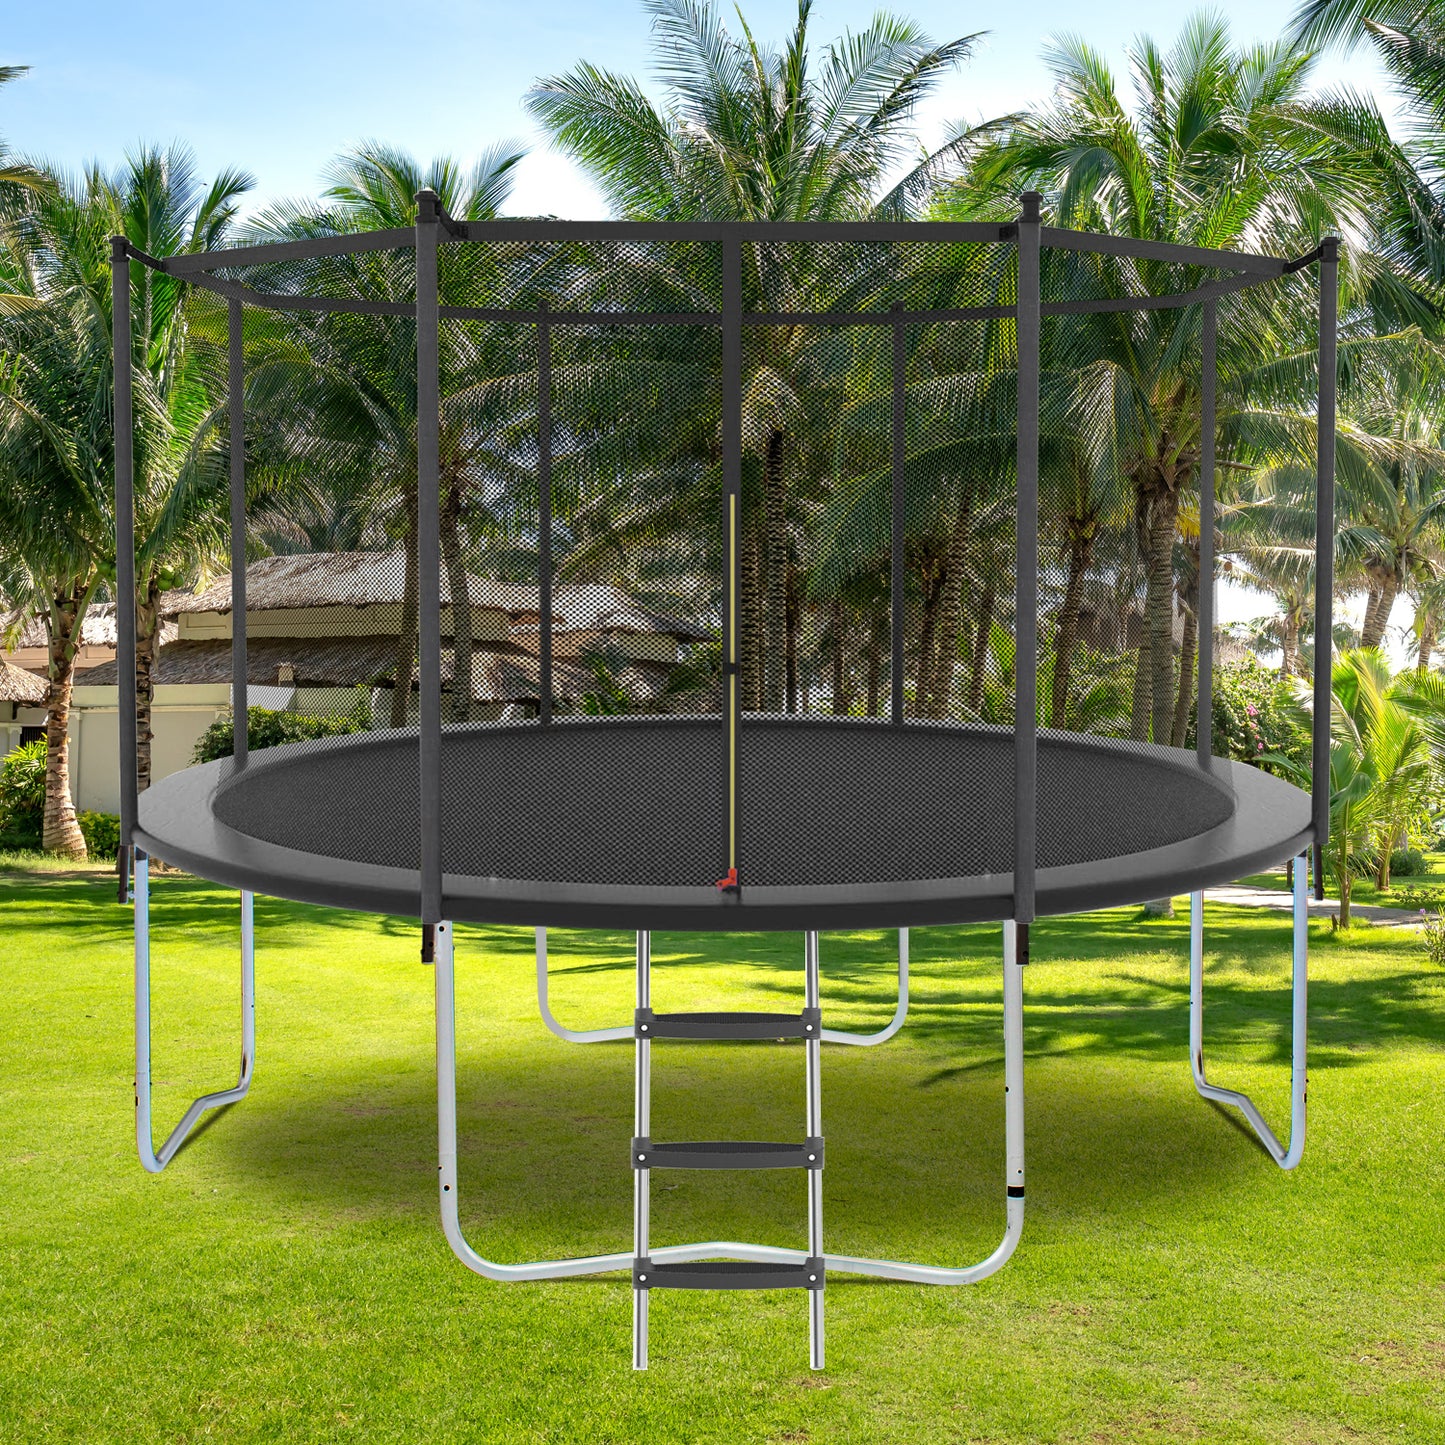 10FT Trampoline with Safety Enclosure Net, Outdoor Trampoline with Heavy Duty Jumping Mat and Spring Cover Padding for Kids and Adults